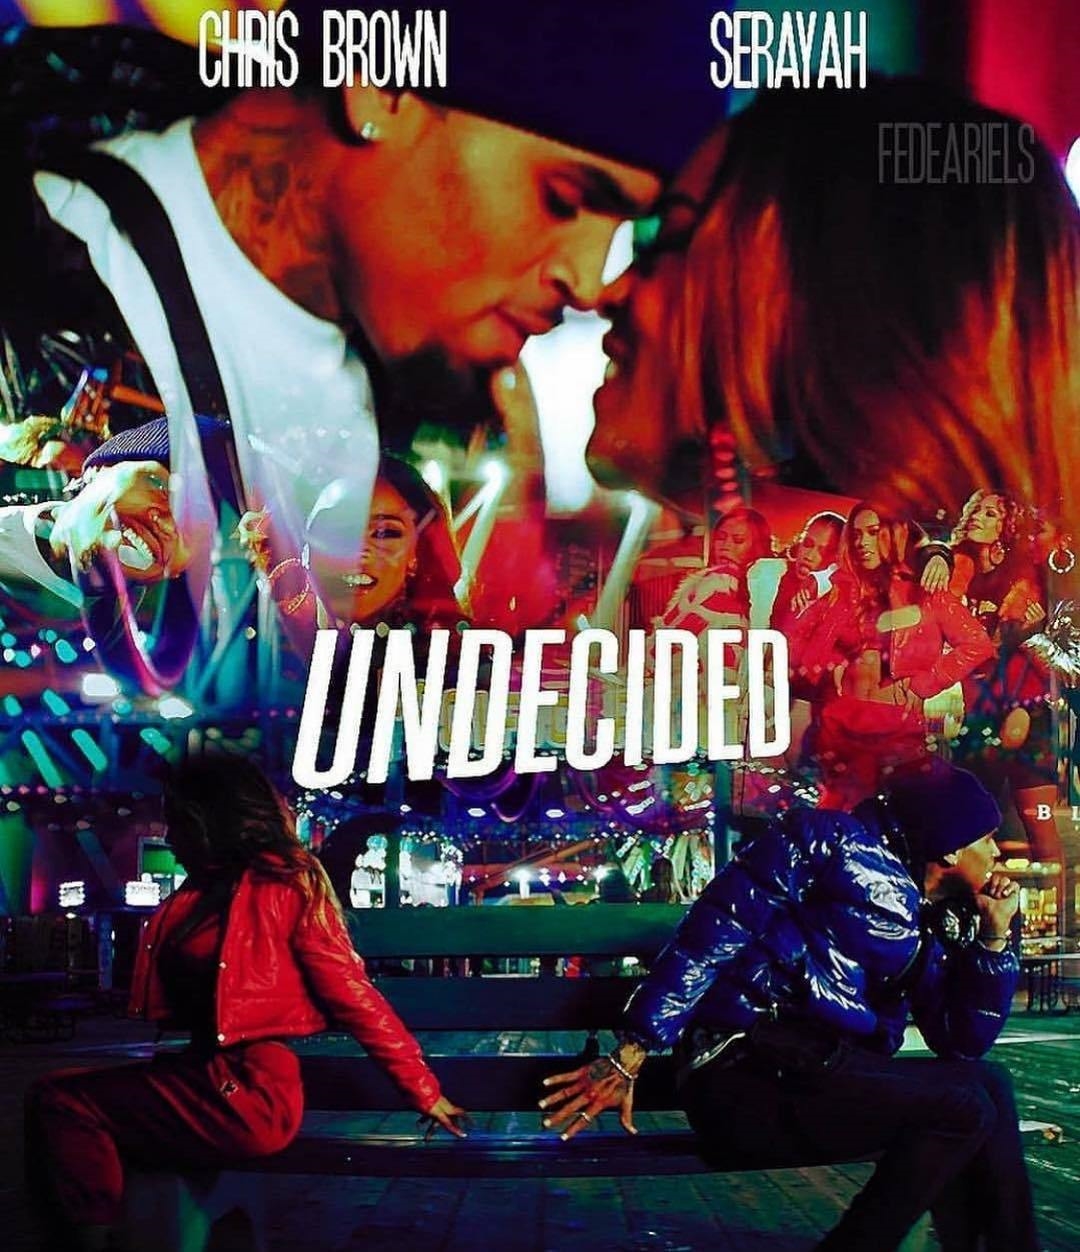 Art for Undecided by Chris Brown